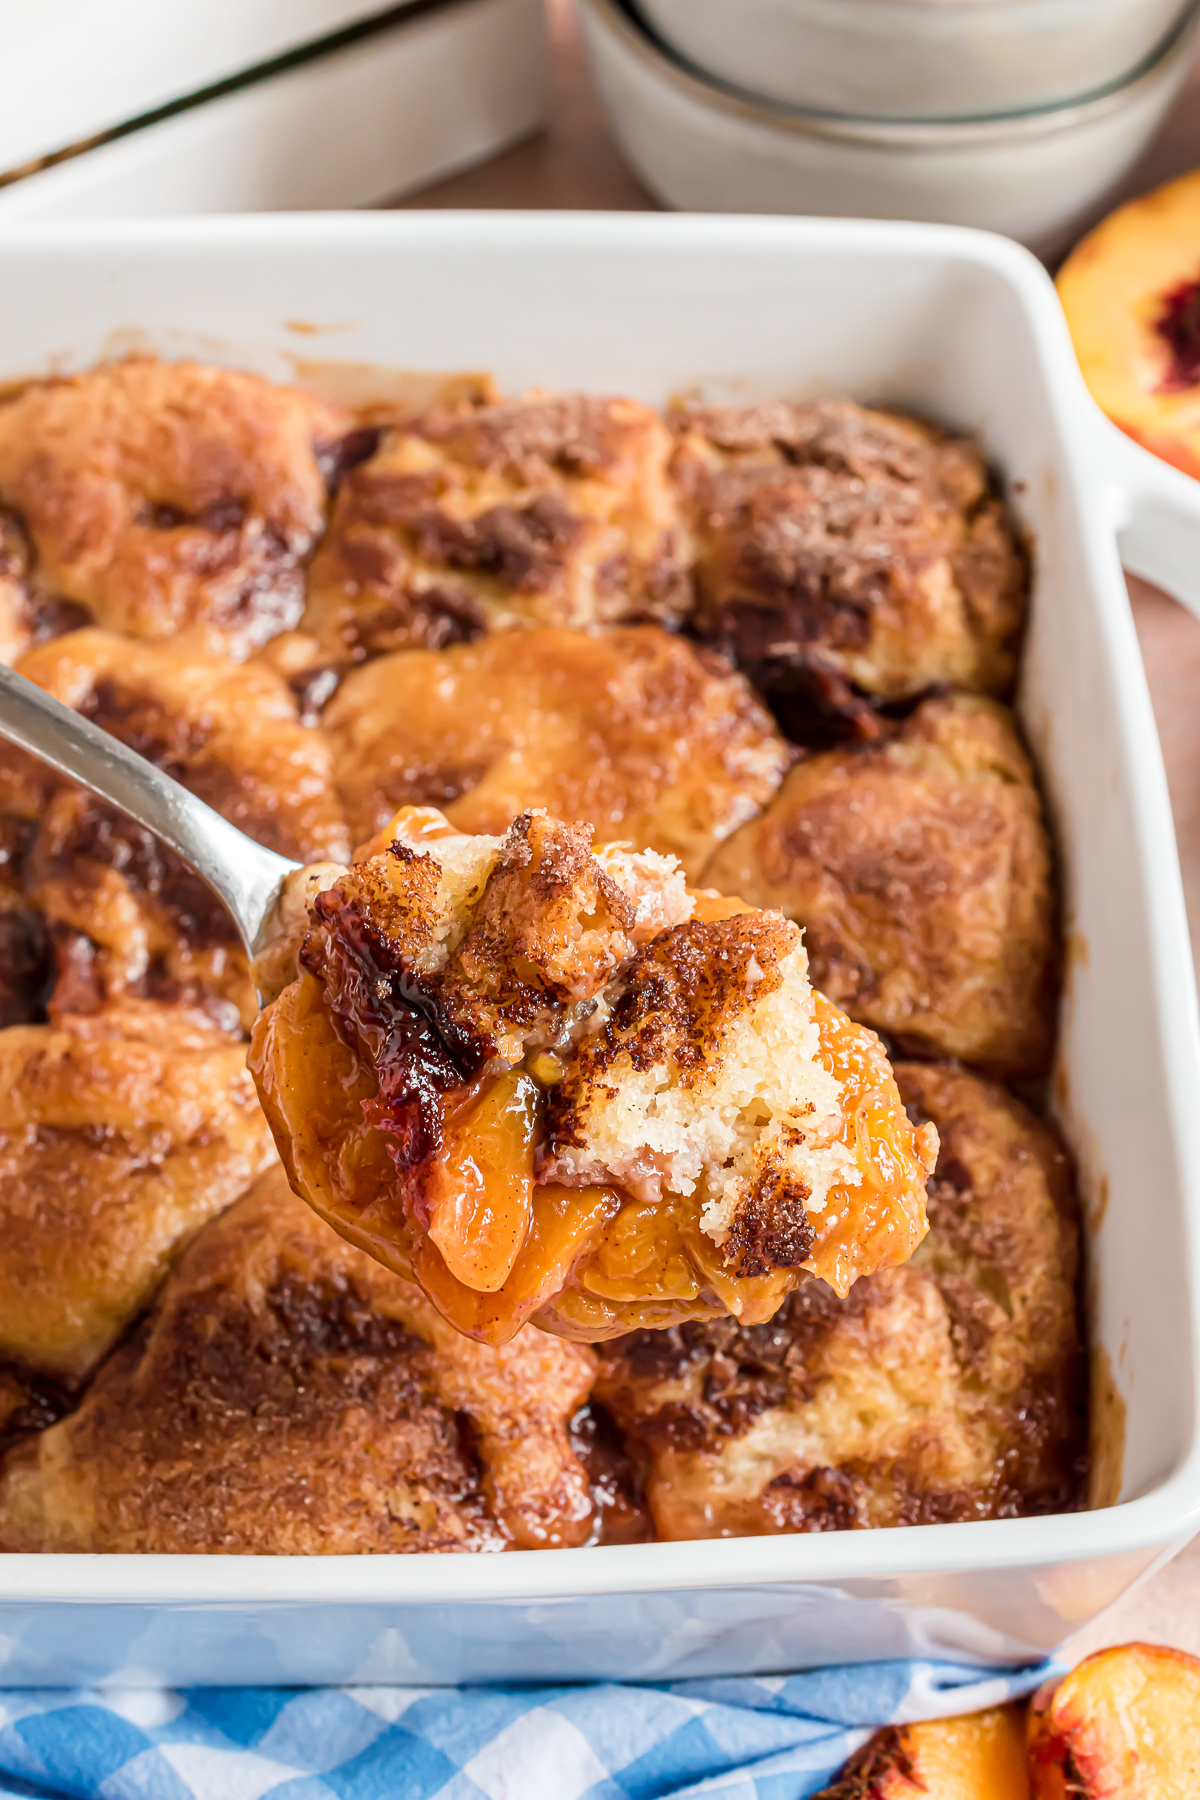 A serving spoon that is full of peach cobbler showing chunks of juicy, sweet peaches and fluffy biscuit topping.